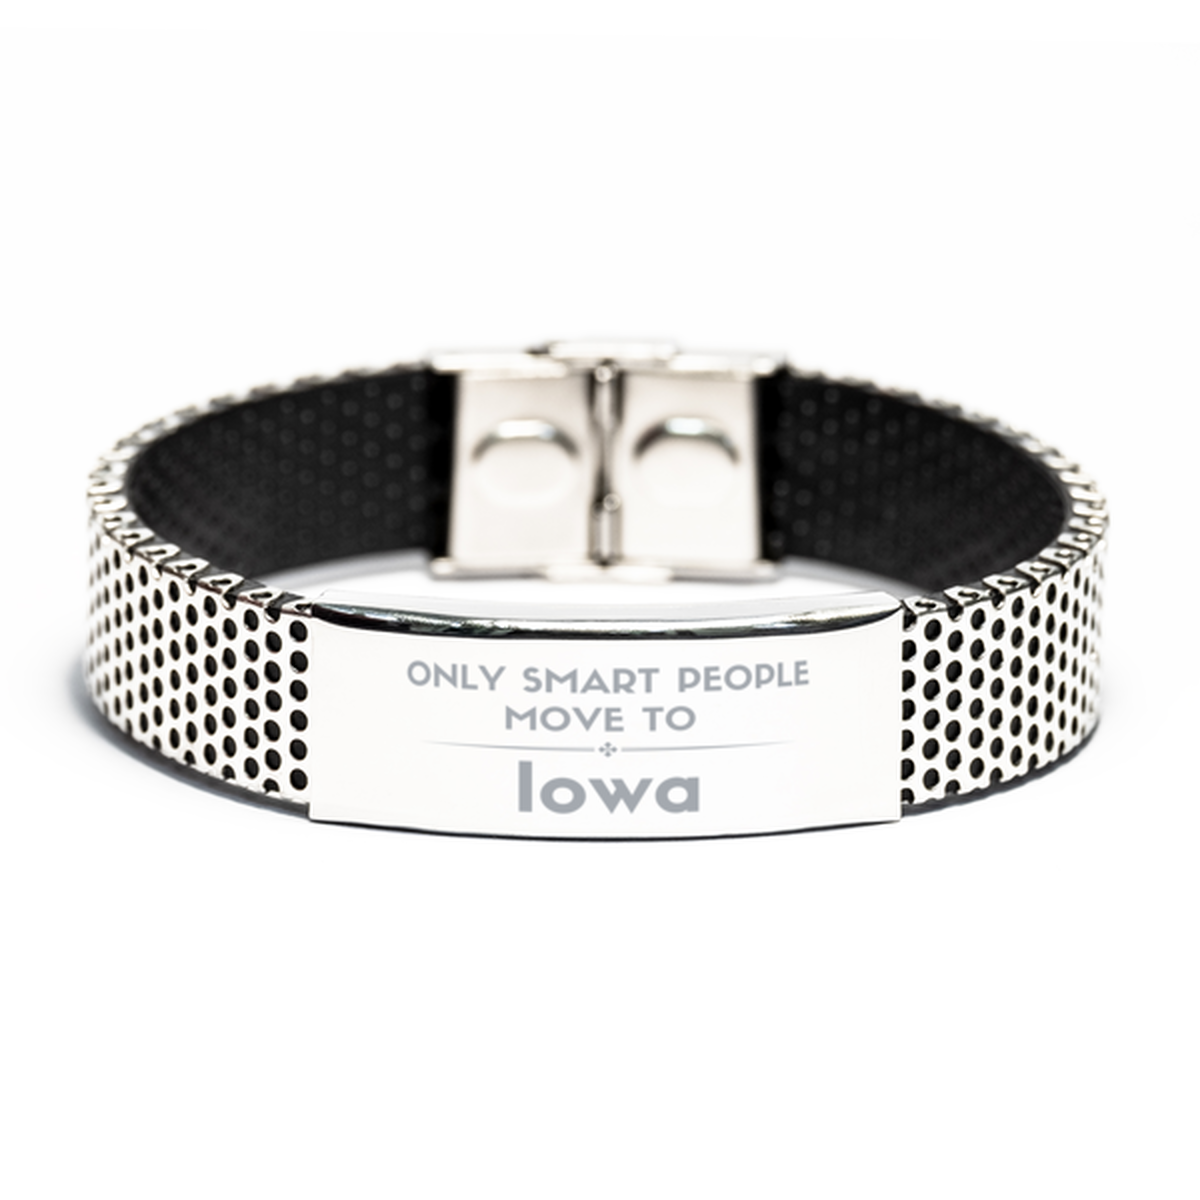 Only smart people move to Iowa Stainless Steel Bracelet, Gag Gifts For Iowa, Move to Iowa Gifts for Friends Coworker Funny Saying Quote